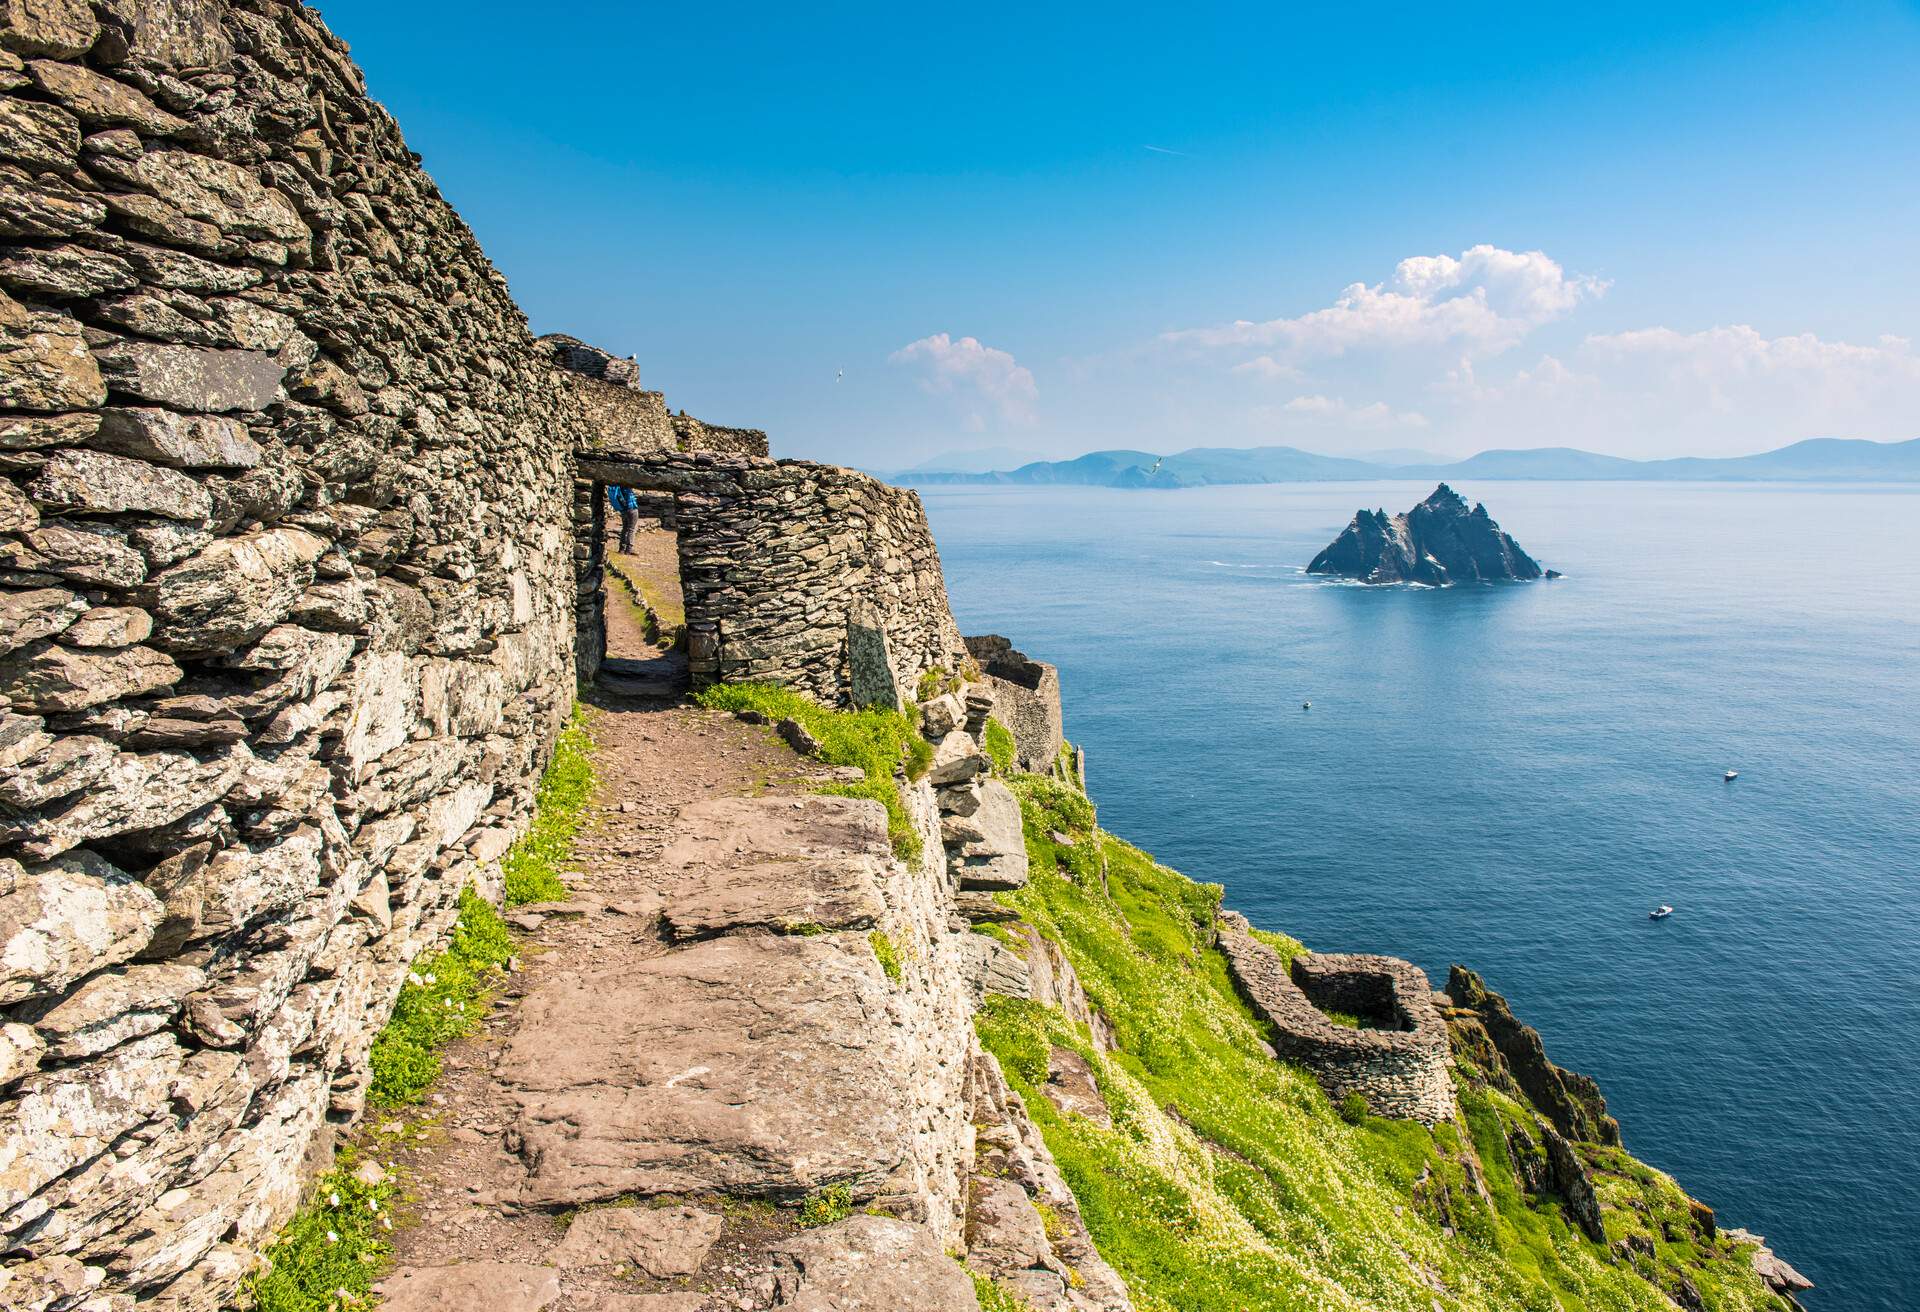 Skellig Michael (Great Skellig), Skellig islands, County Kerry, Munster province, Ireland, Europe. Monastery's architecture on the top of of the island.